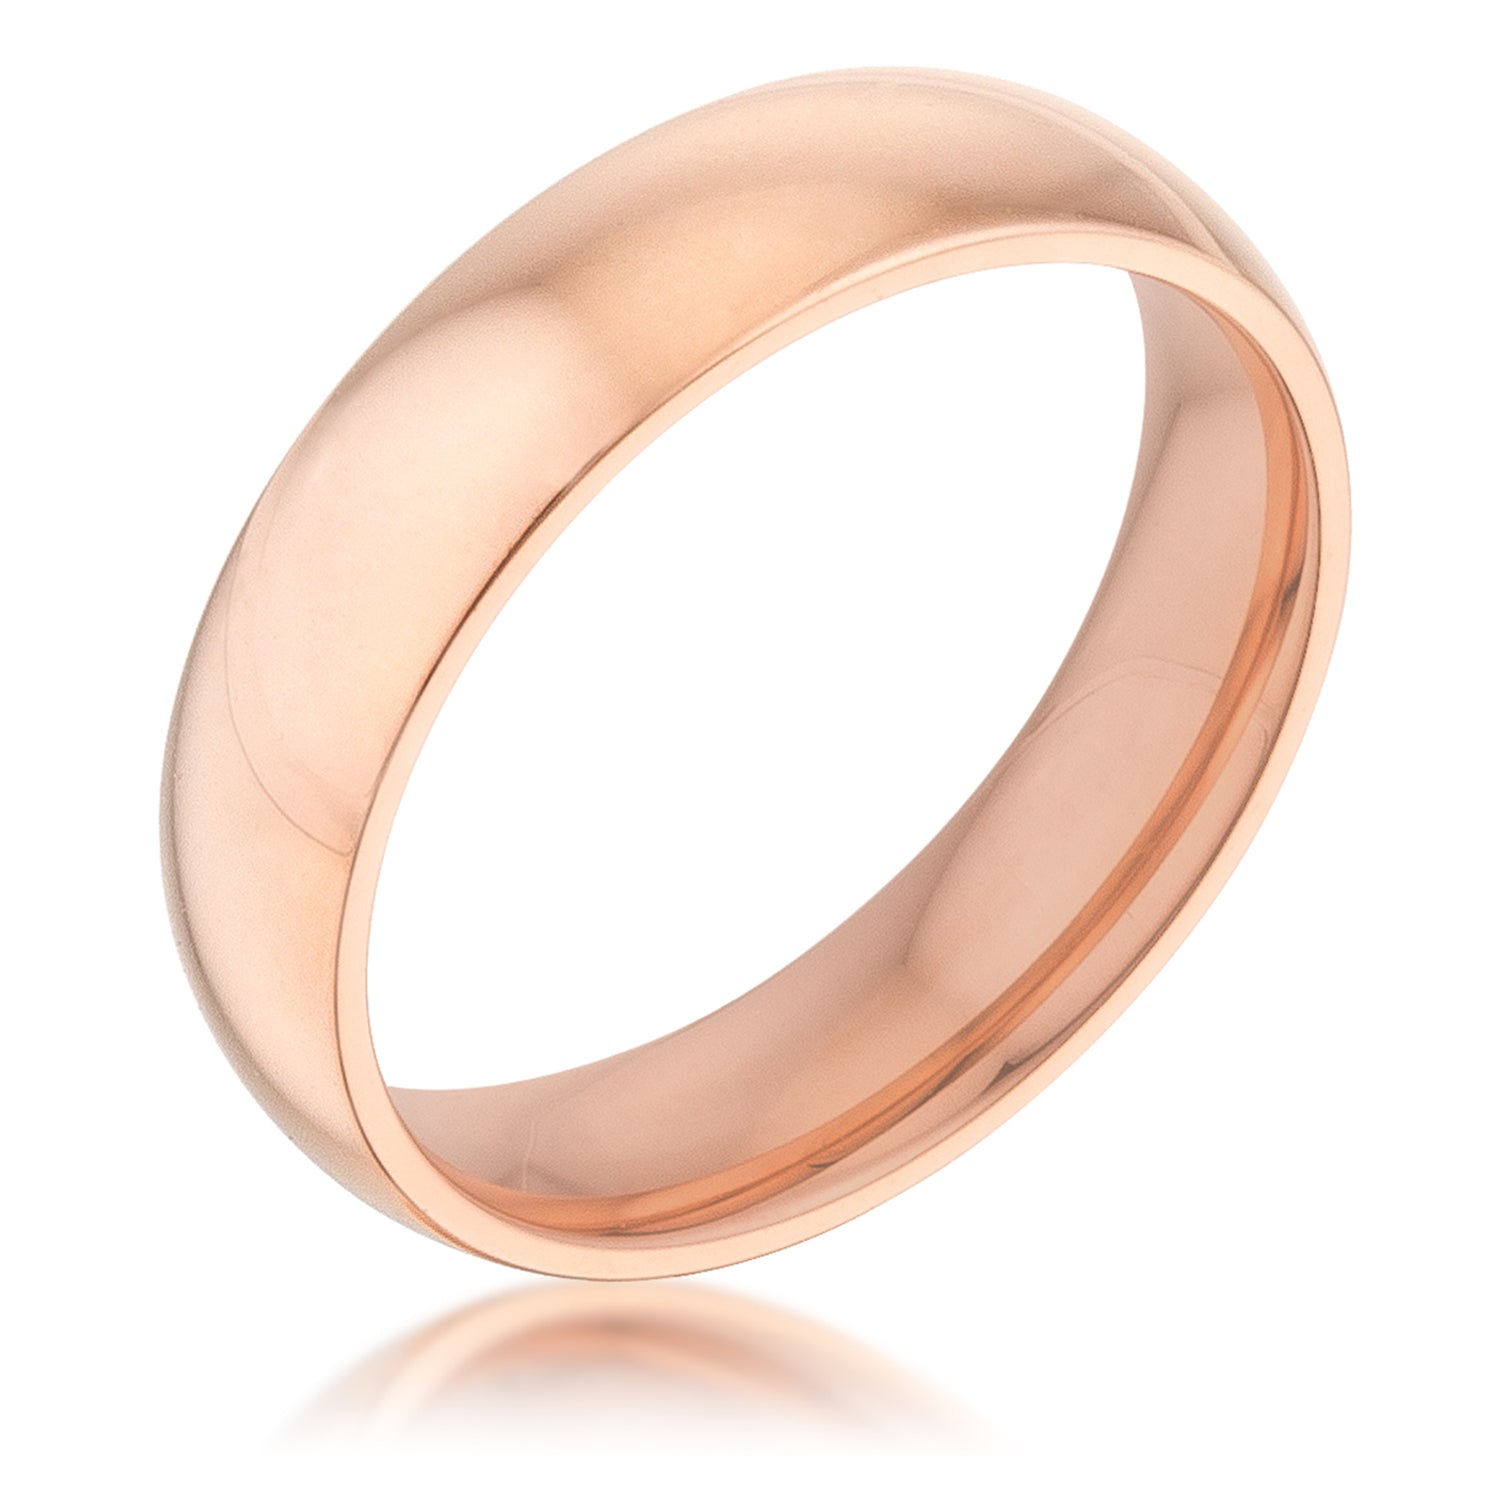 5 mm IPG Rose Goldtone Stainless Steel Band [ clone ], <b>Size 5</b> - LinkagejewelrydesignLinkagejewelrydesign